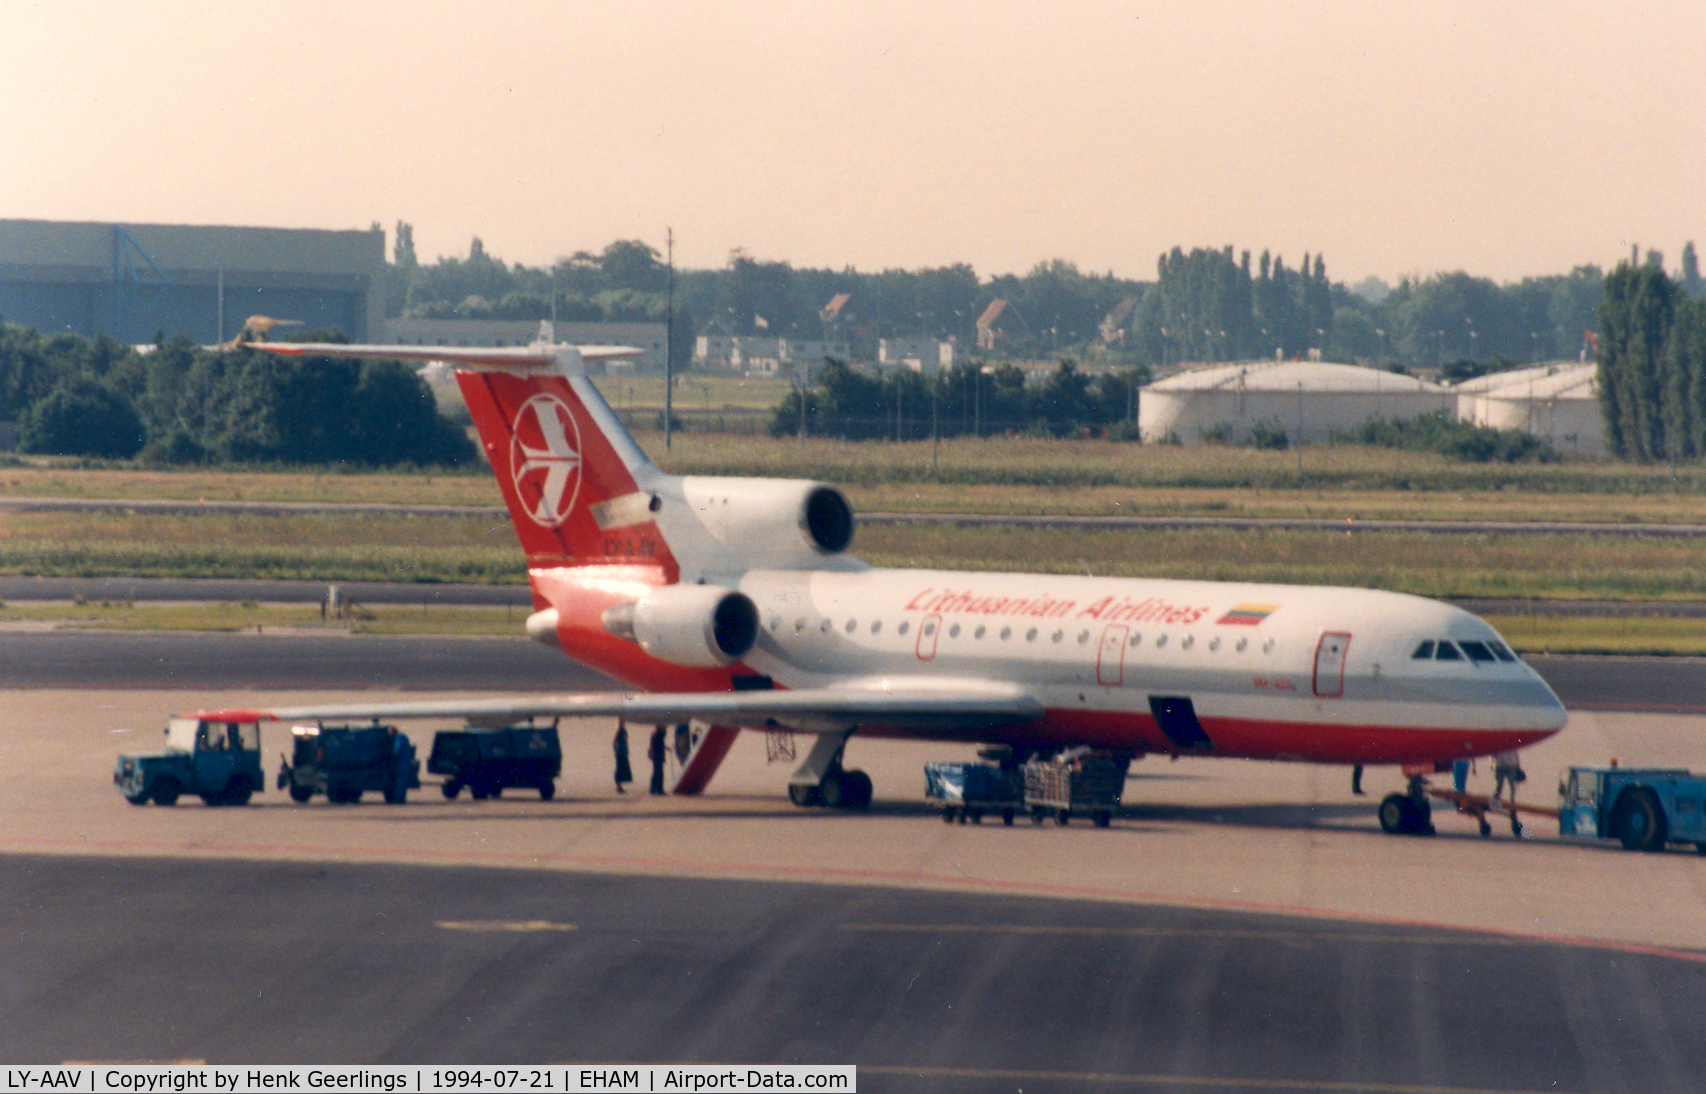 LY-AAV, 1987 Yakovlev Yak-42 C/N 4520424711399, Lithuanian Airlines